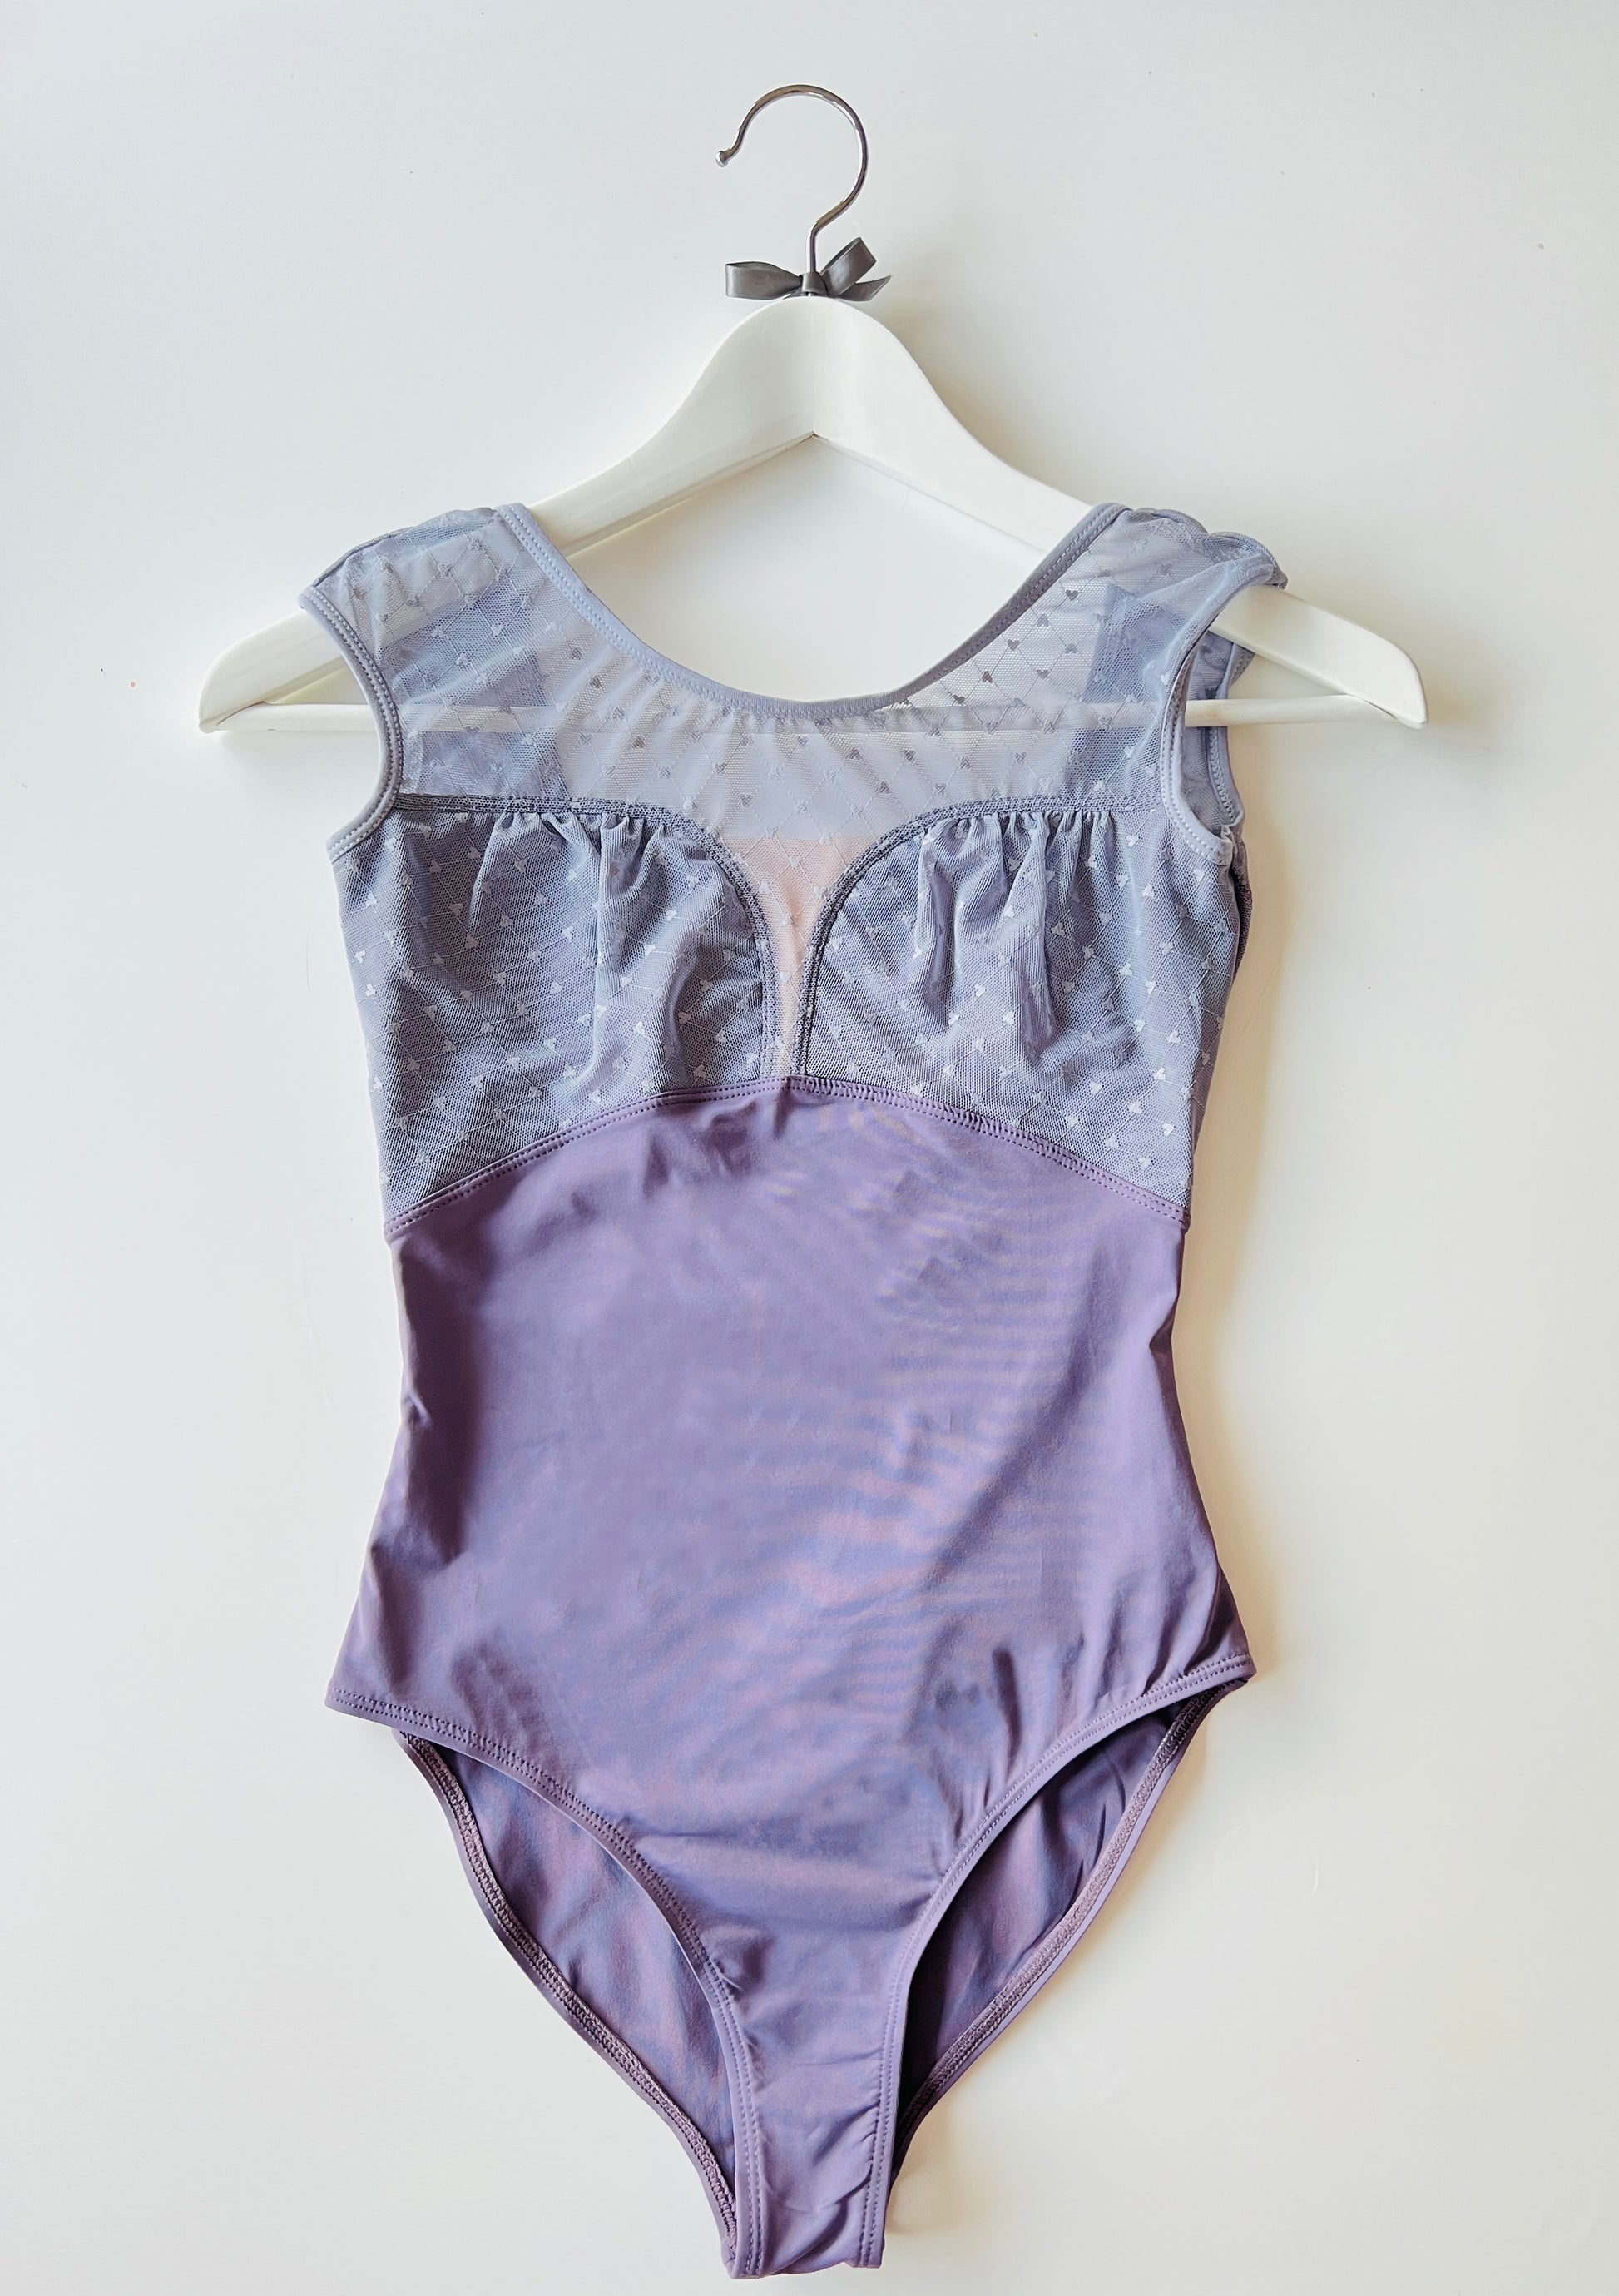 Baiwu Cap sleeve dance ballet leotard from Baiwu with a sweet heart neck line in lavender, lilac, pastel purple from The Collective Dancewear 